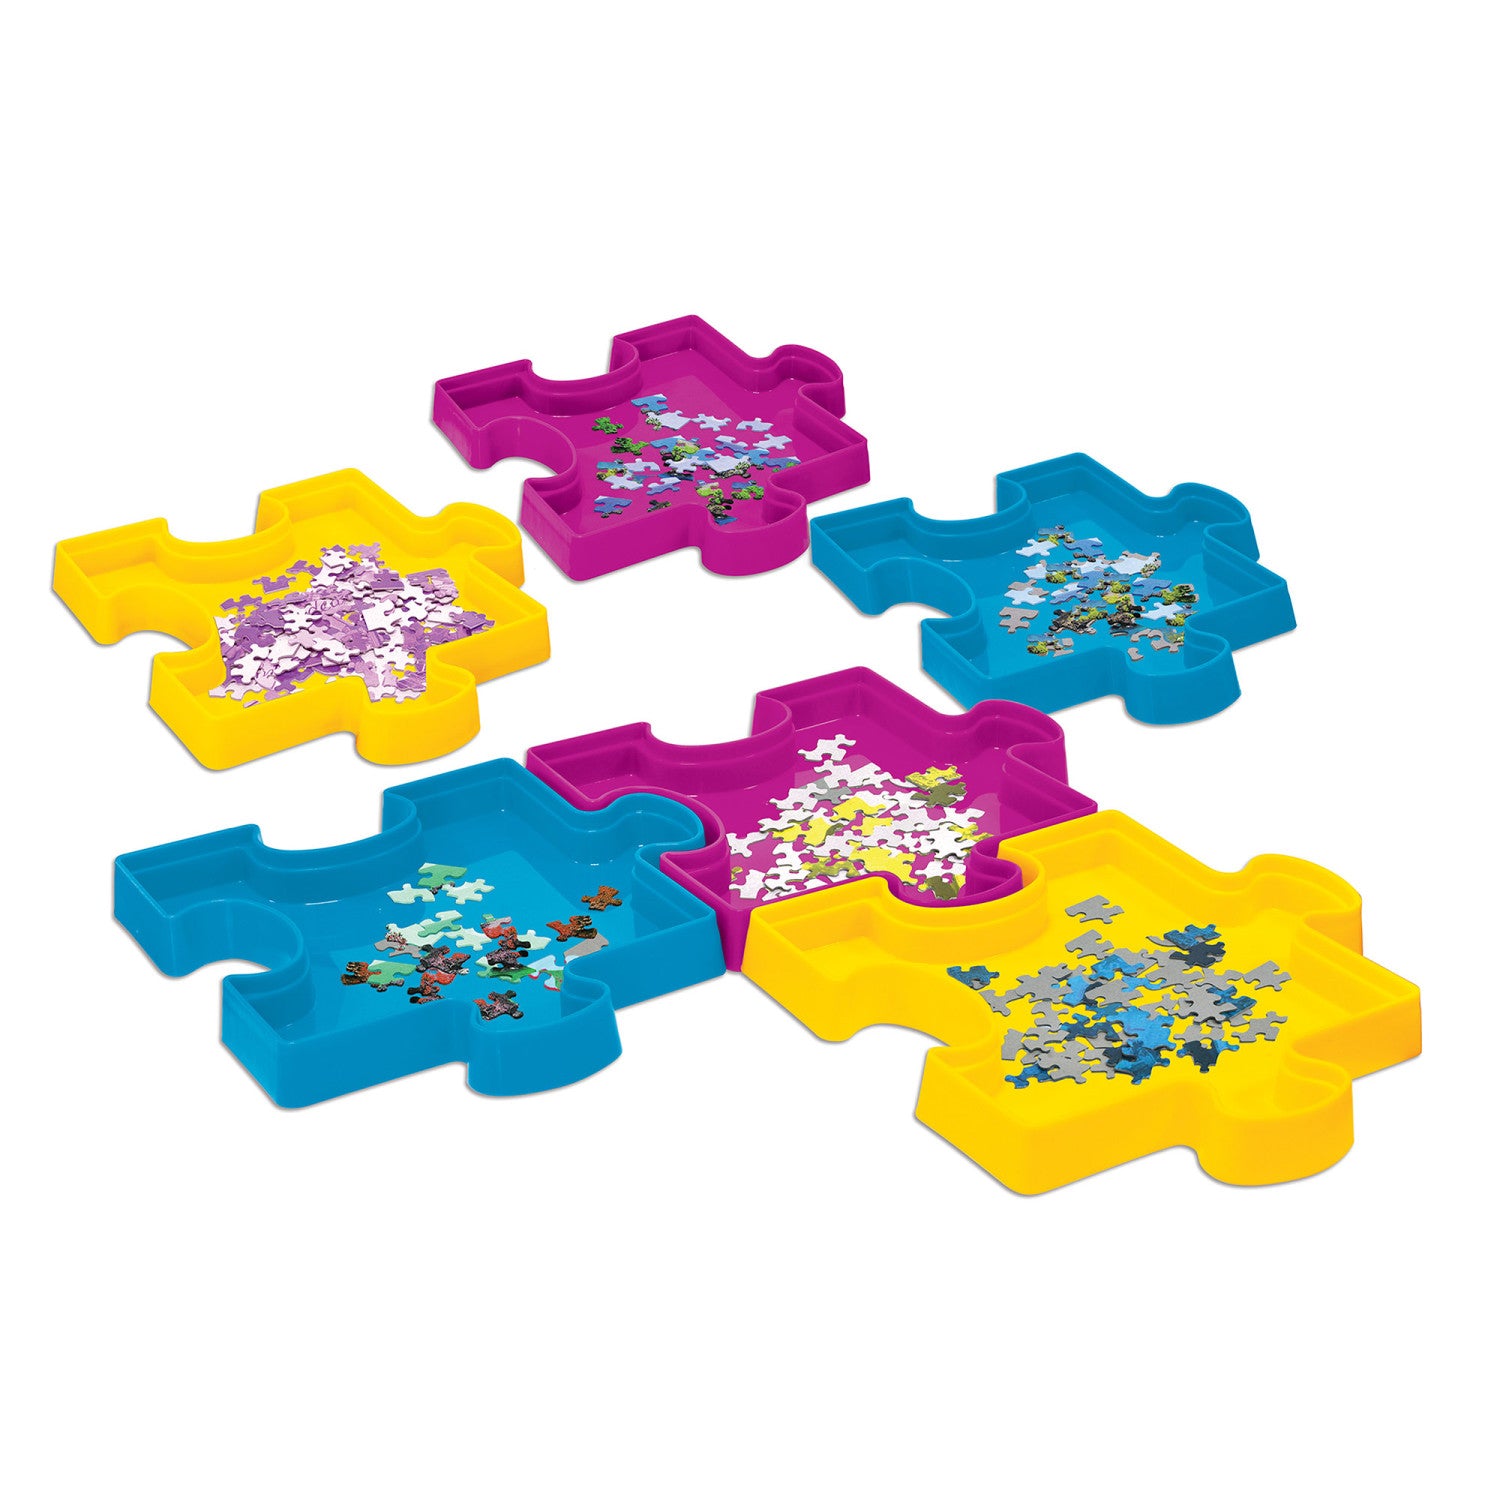 Puzzle Accessories - Sort and Save